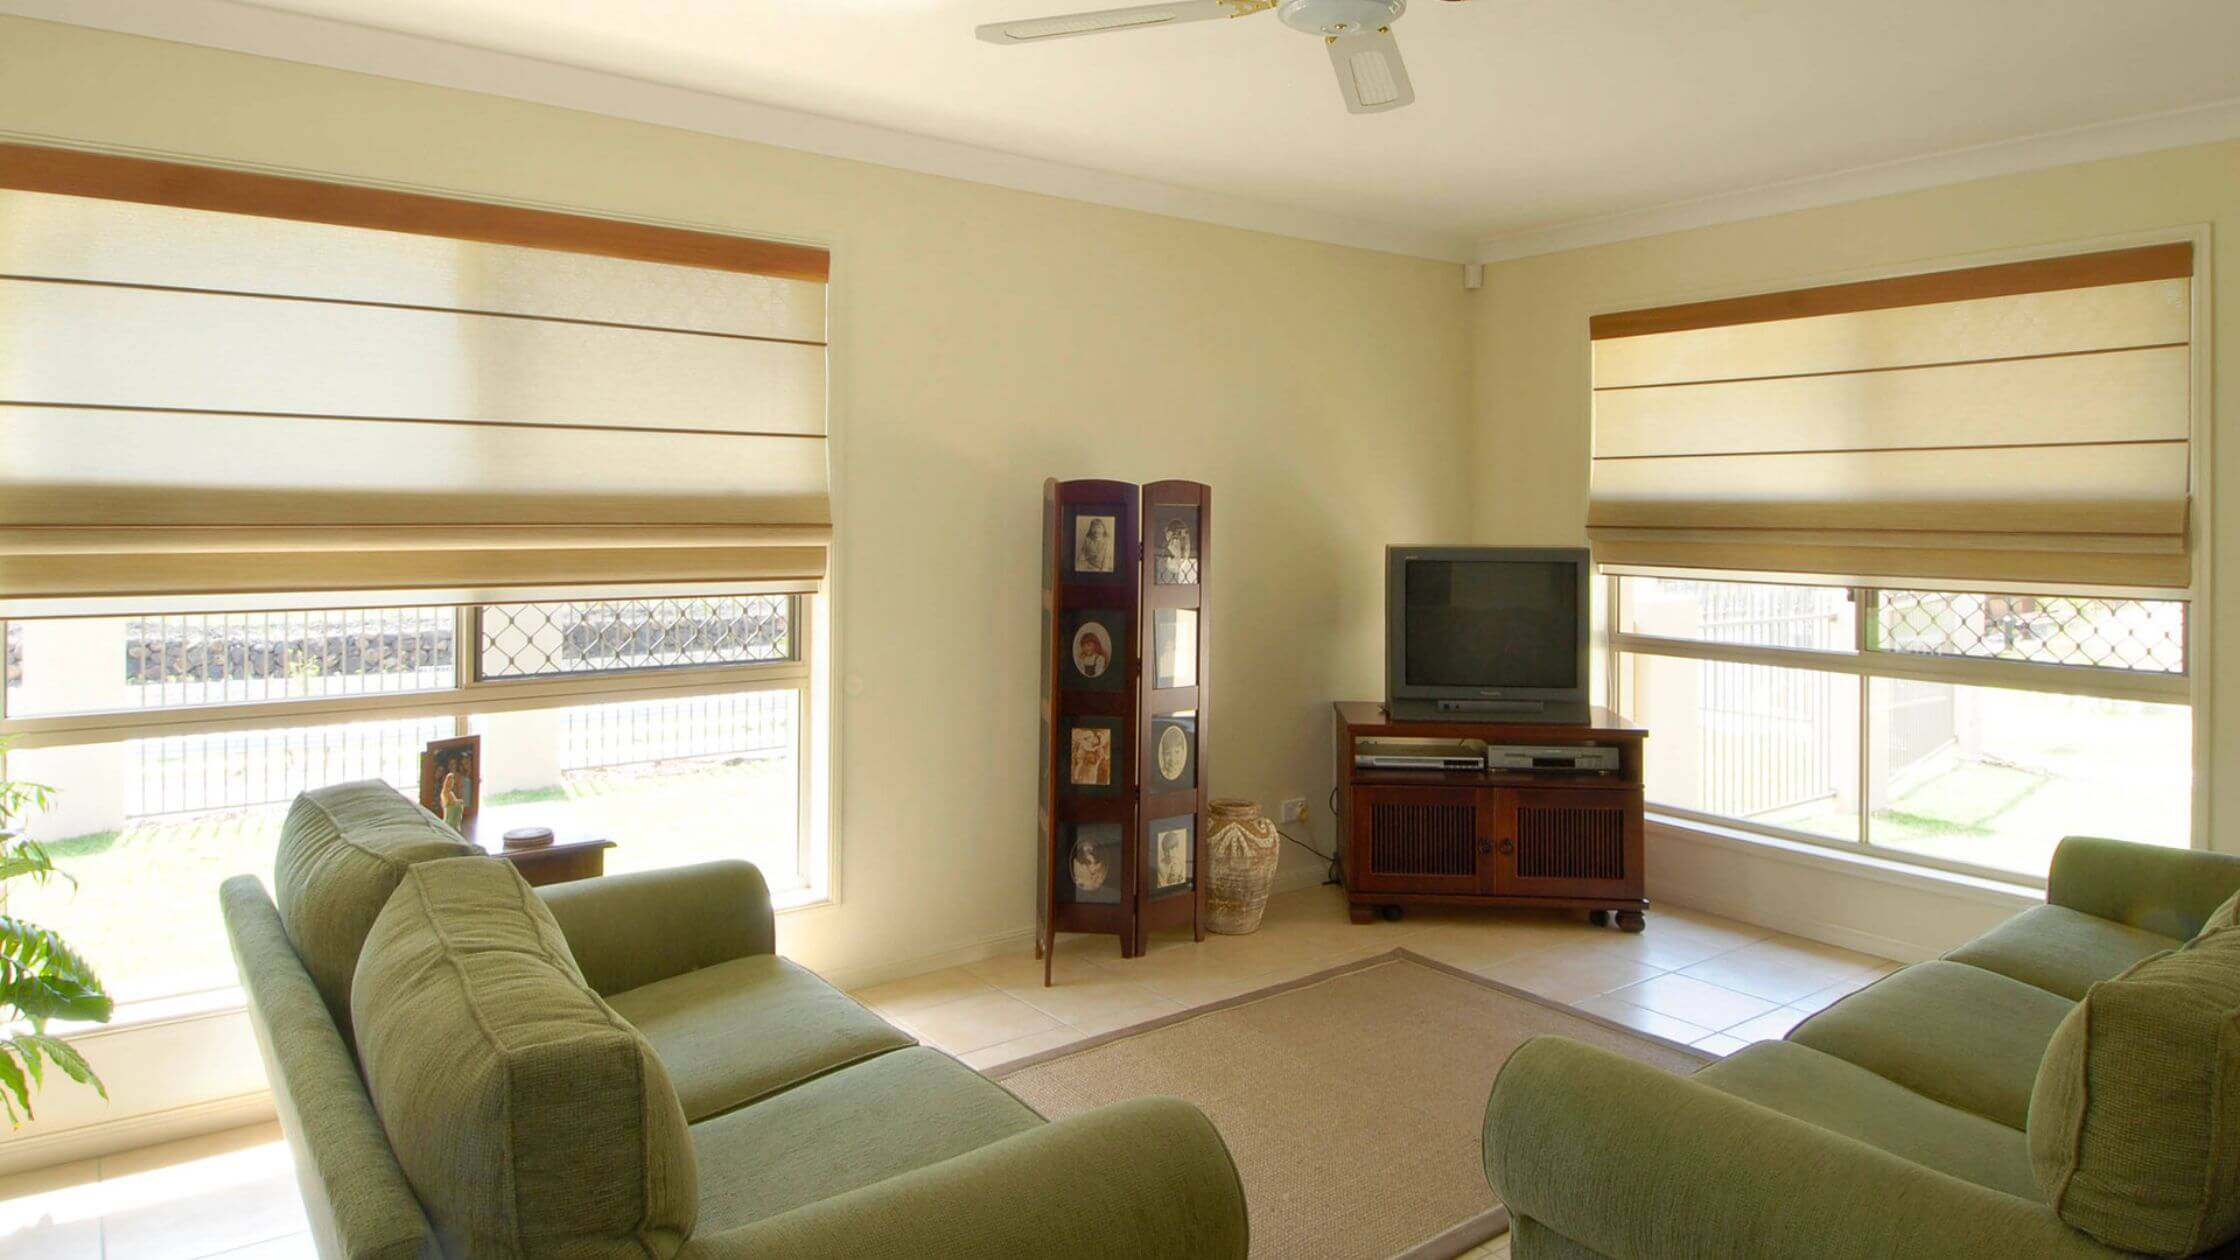 How Long Lasting Are The Roman Blinds?